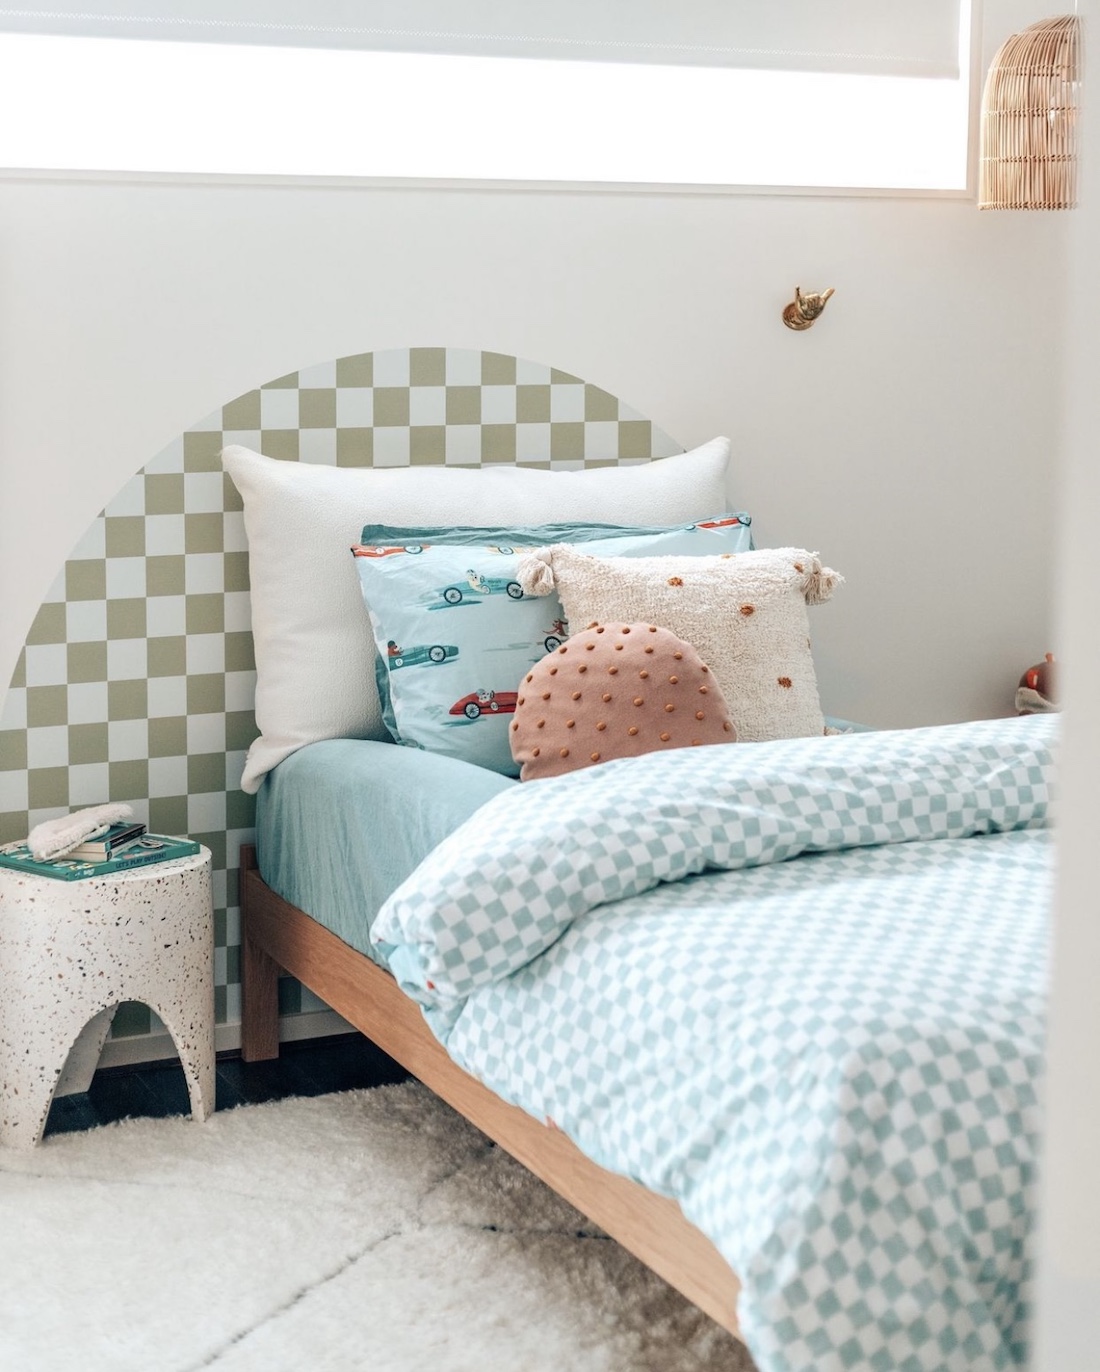 Checkered bedding in kids room